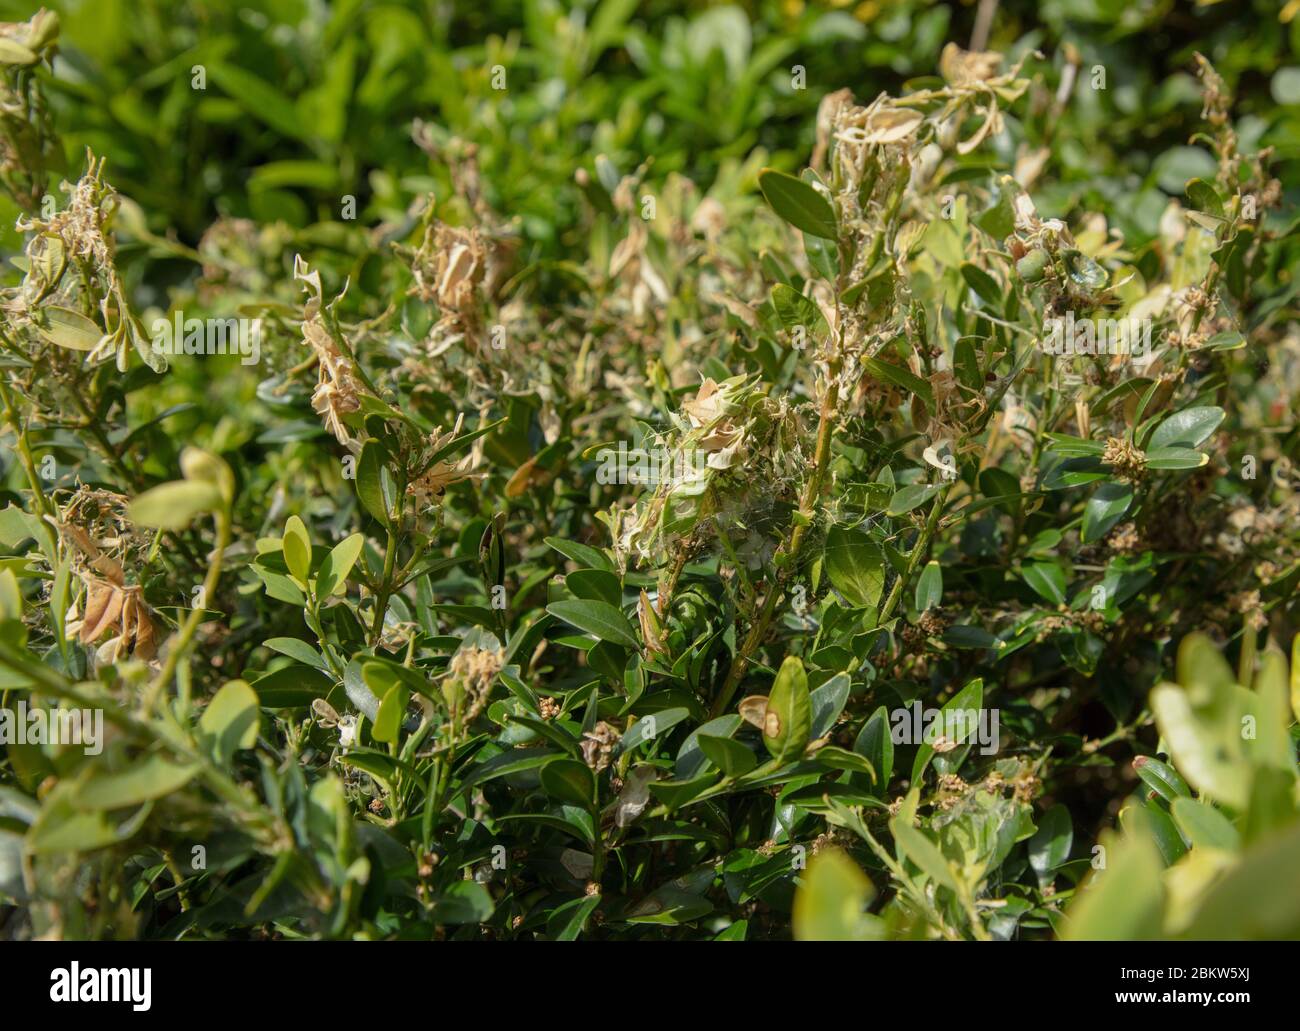 Damage seen done by the box tree moth to well established buxus shrubs in a garden. Stock Photo